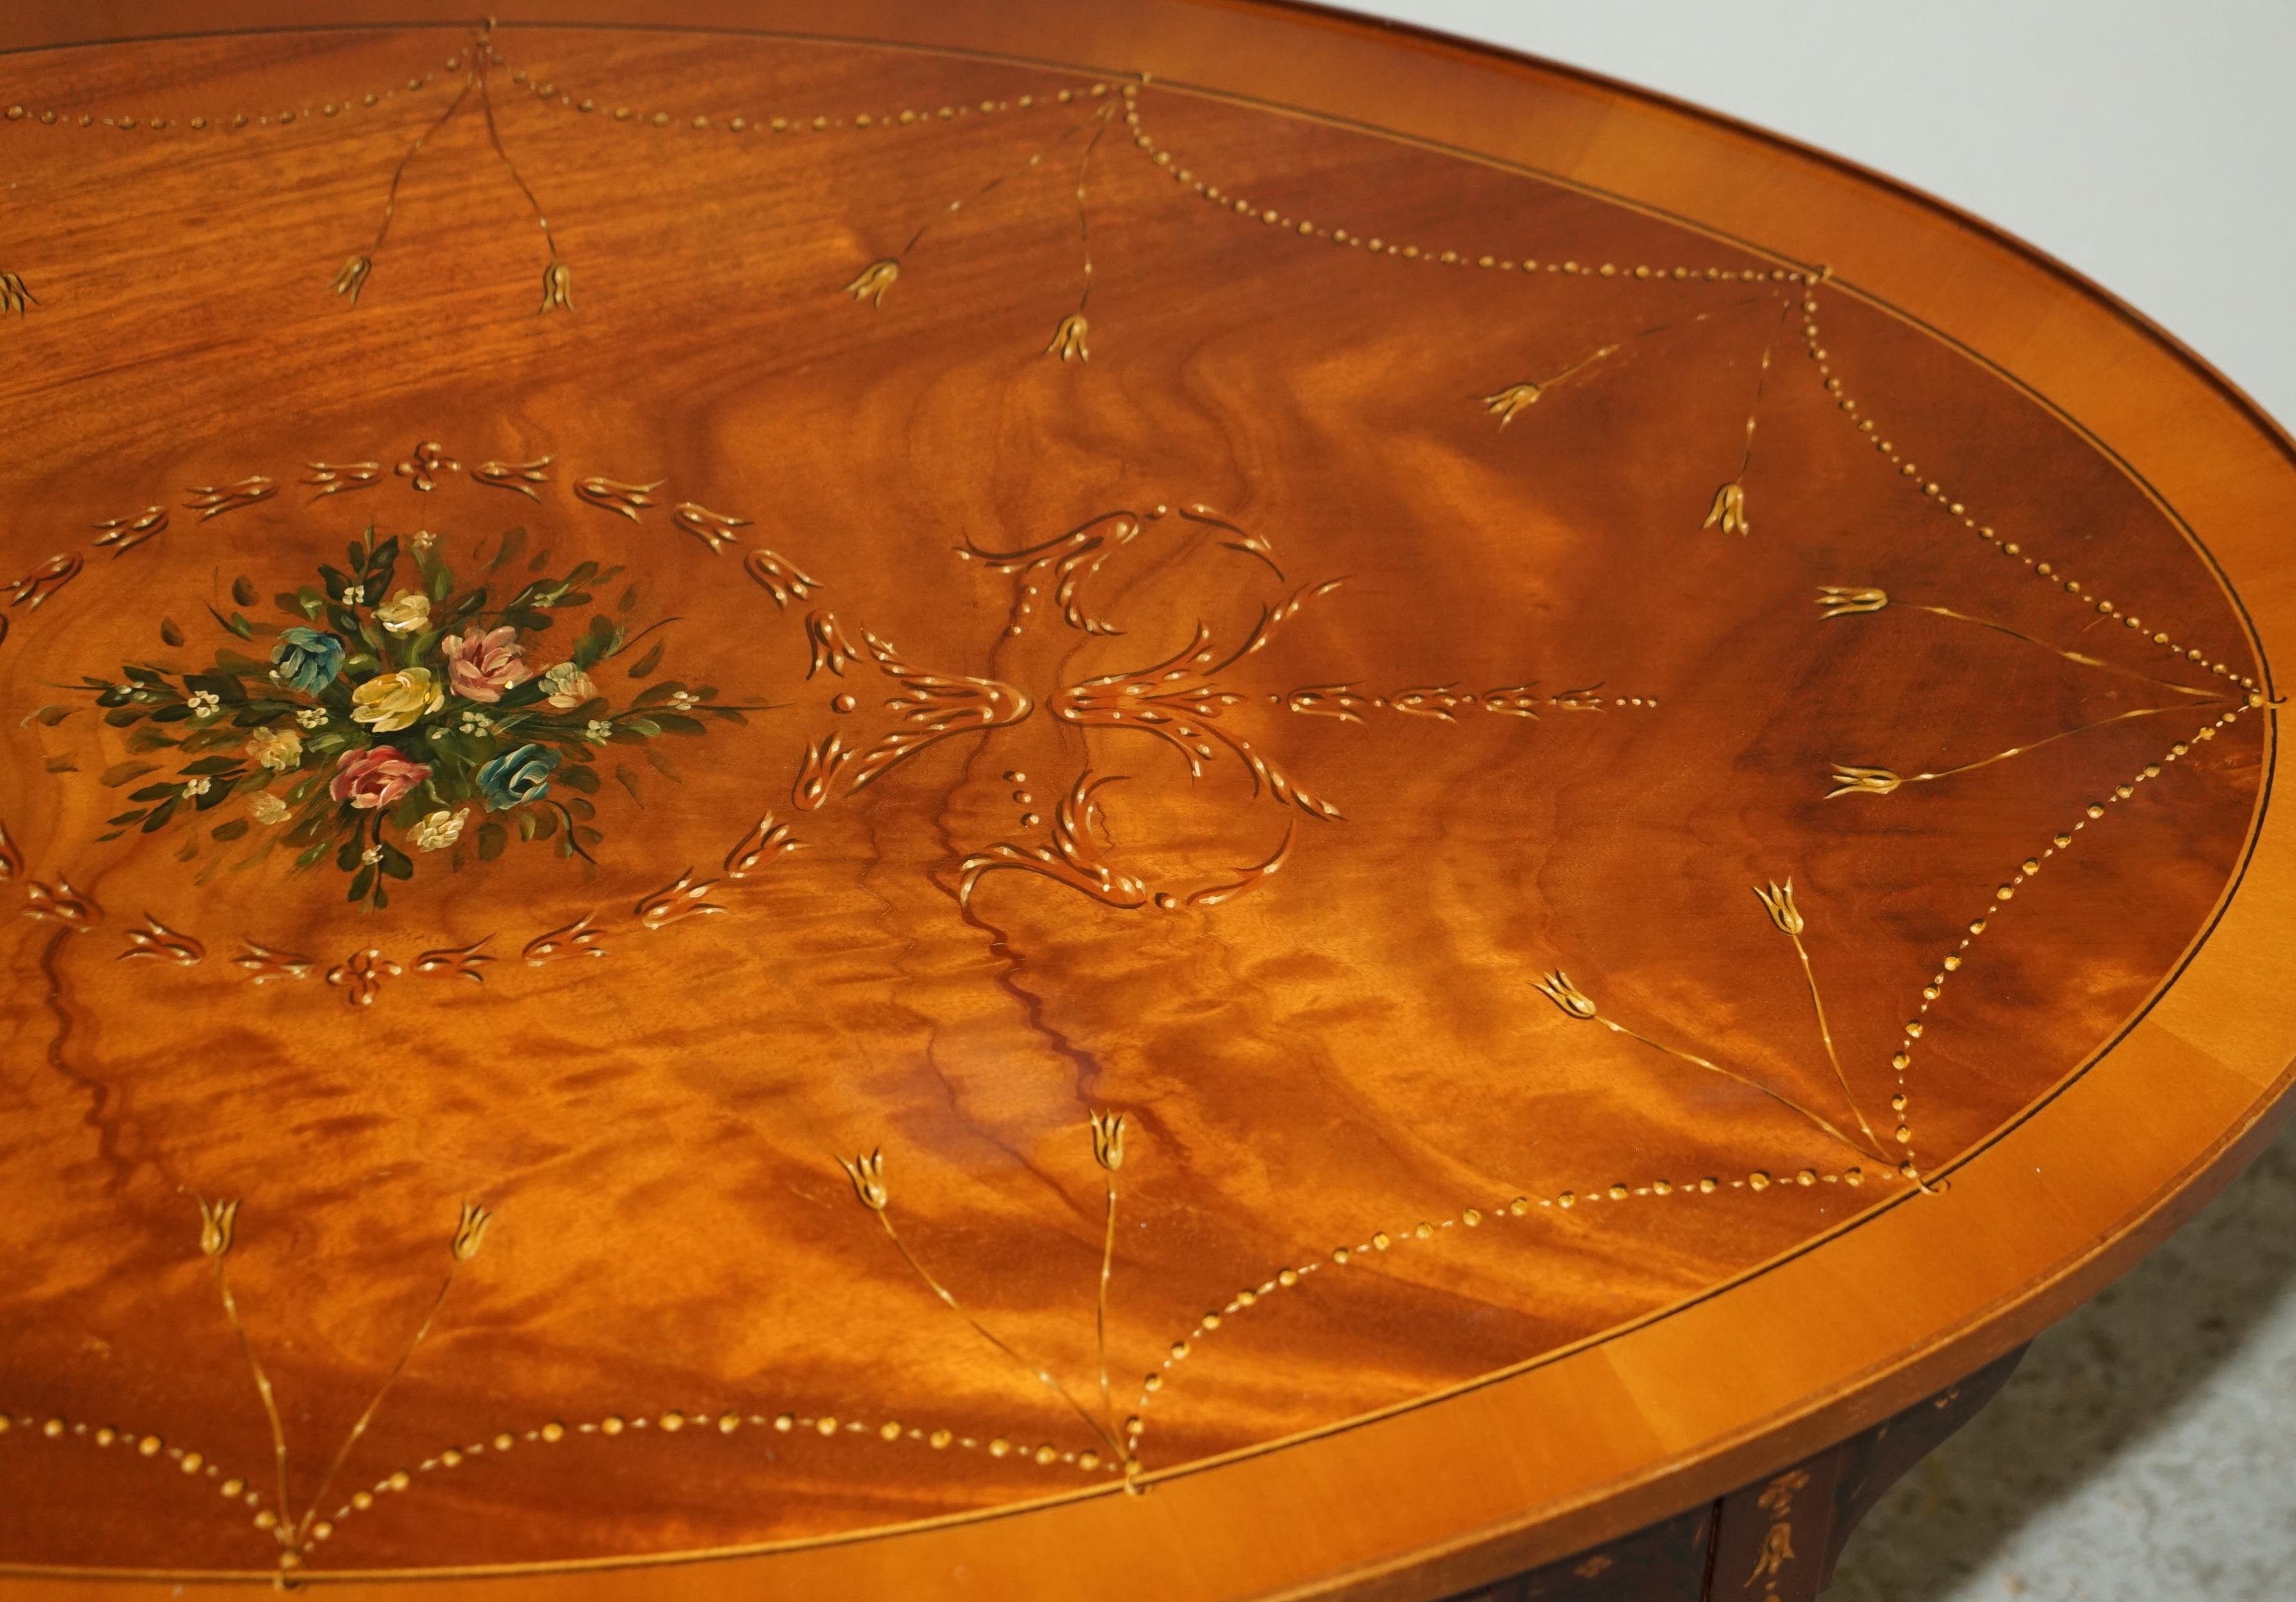 Stunning Oval Hardwood Coffee Table With Splayed Legs Decorative Floral Detail 5